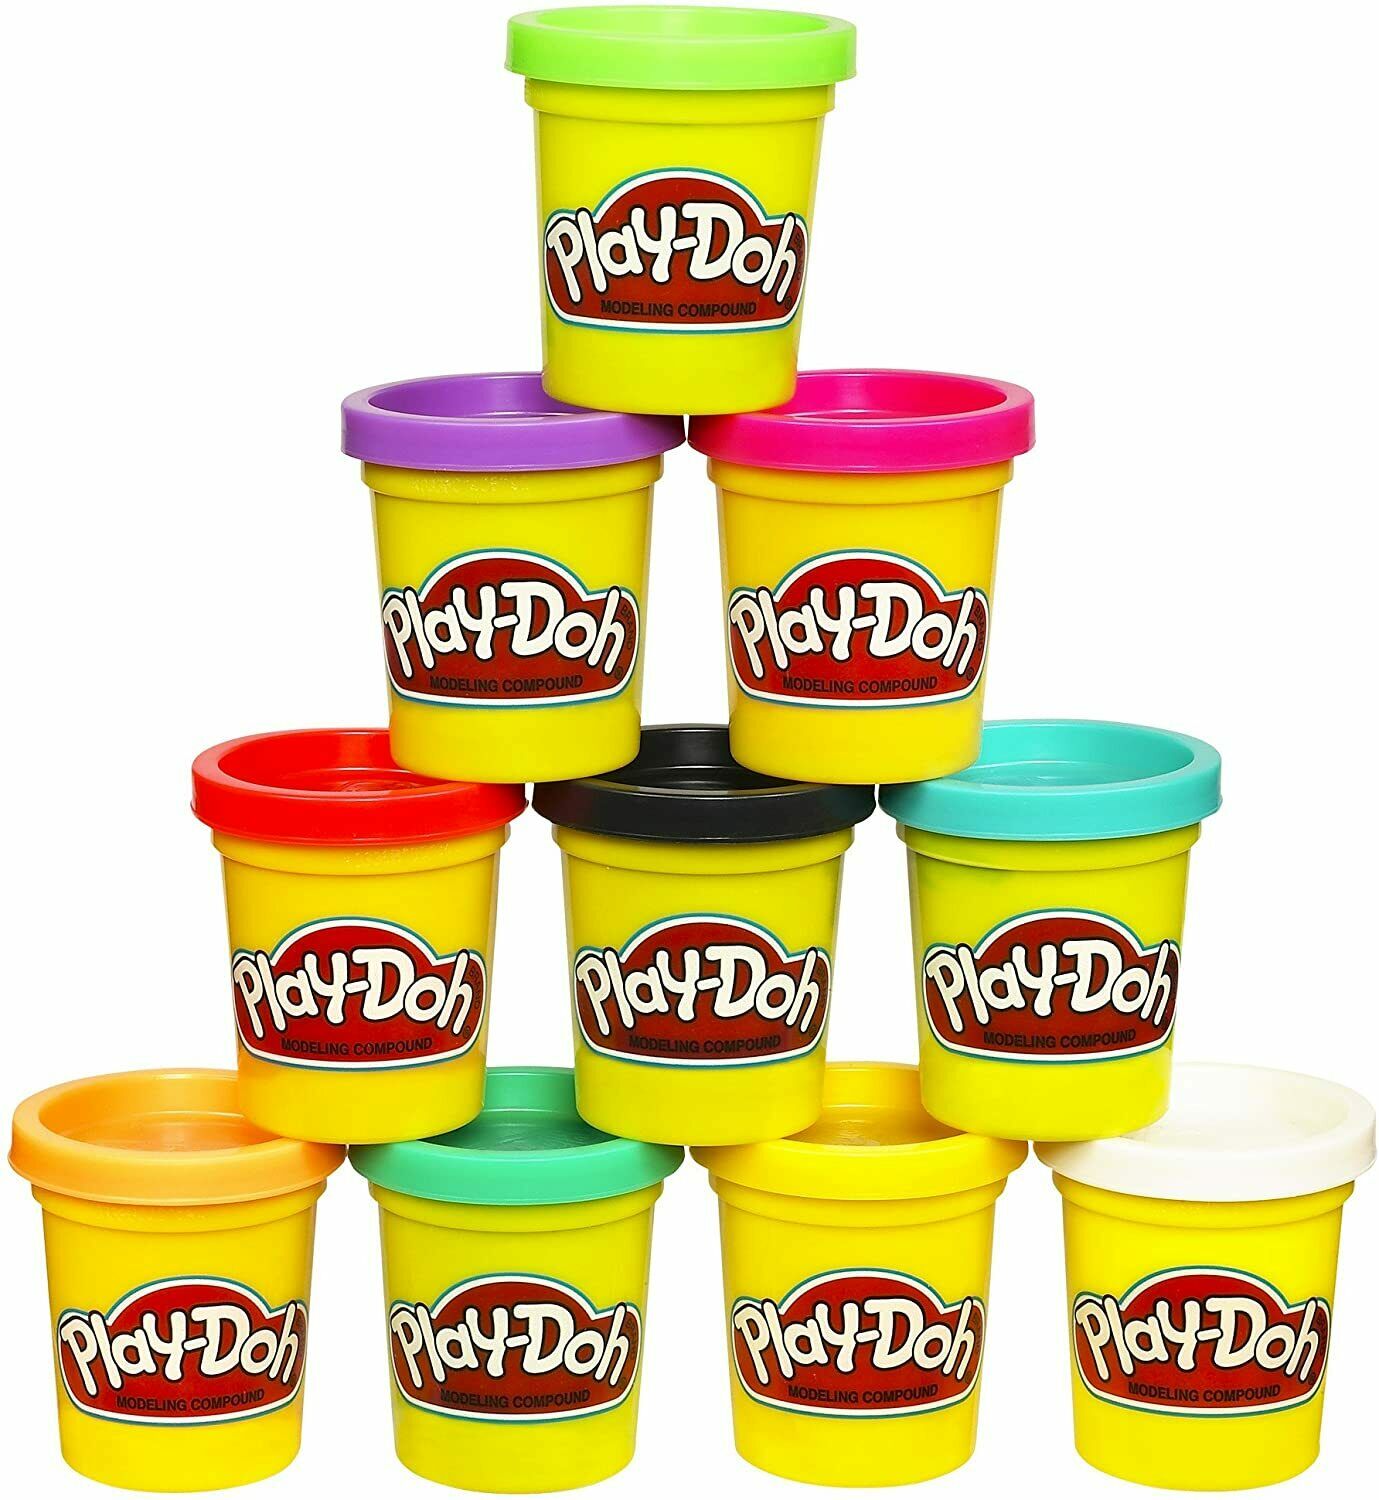 Play-doh Modeling Compound 10 Pack Case Of Colors, Non-toxic, Assorted Colours